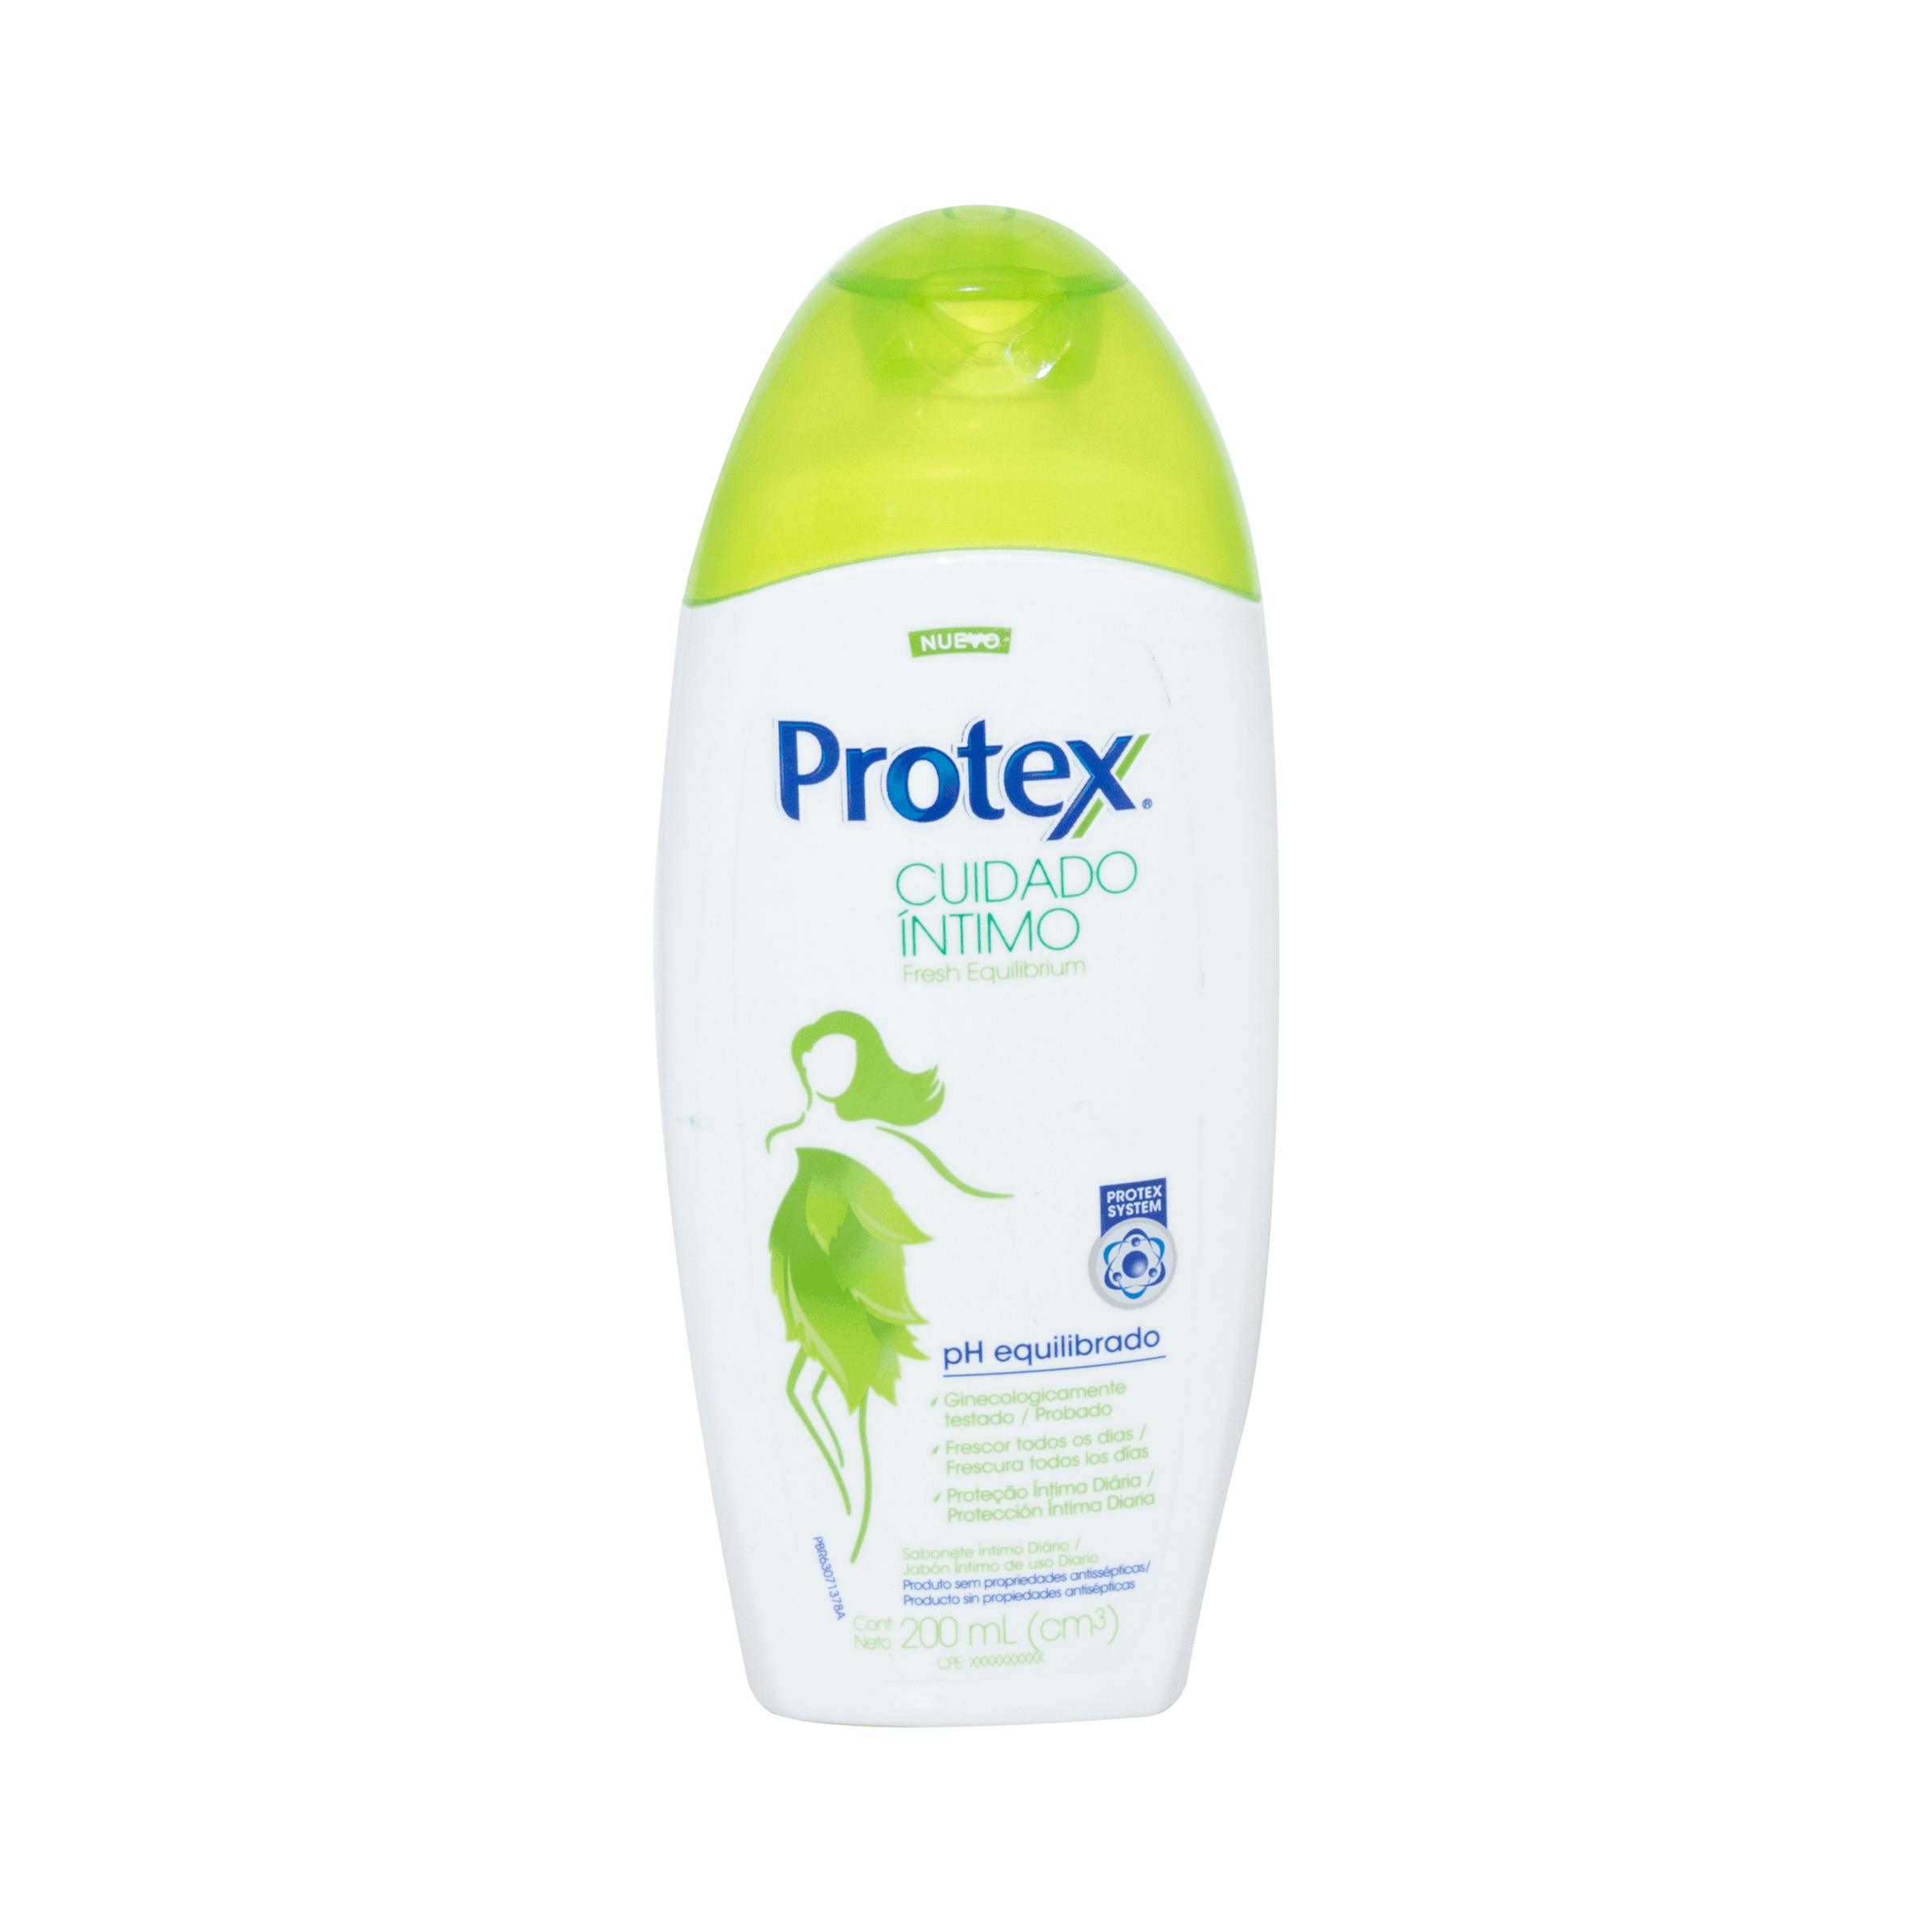 PROTEX JABON INTIMO 200 ML FR EQUIL